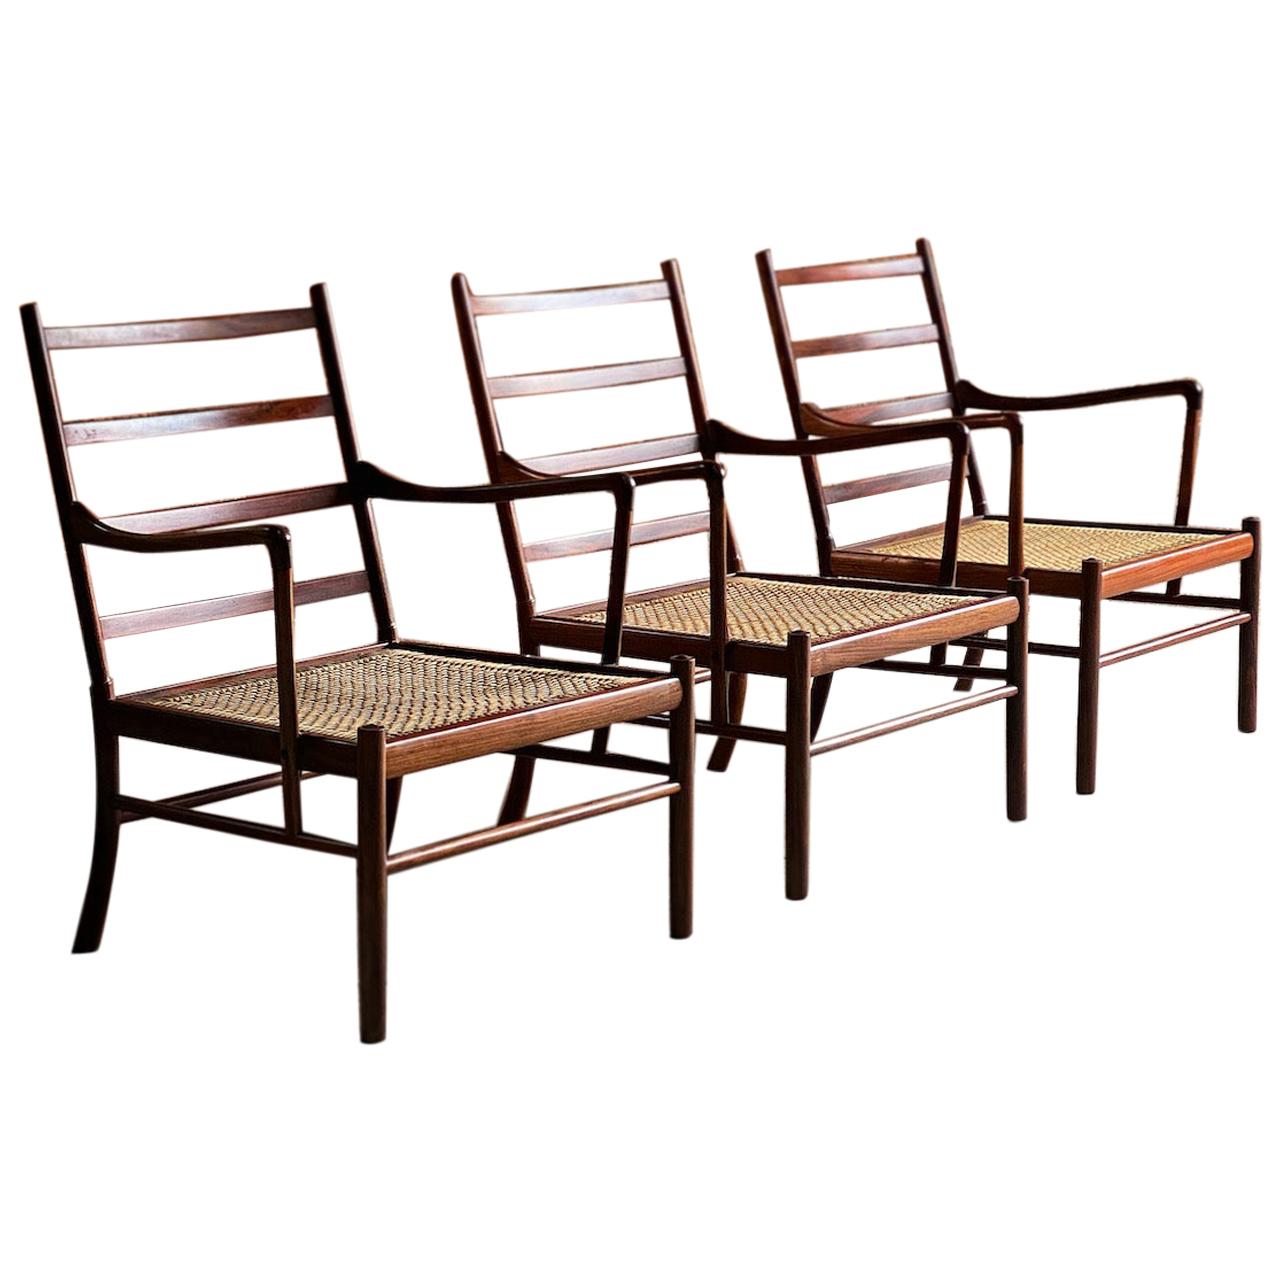 Ole Wanscher Model 149 Rosewood Colonial Chairs by Poul Jeppesens, circa 1950